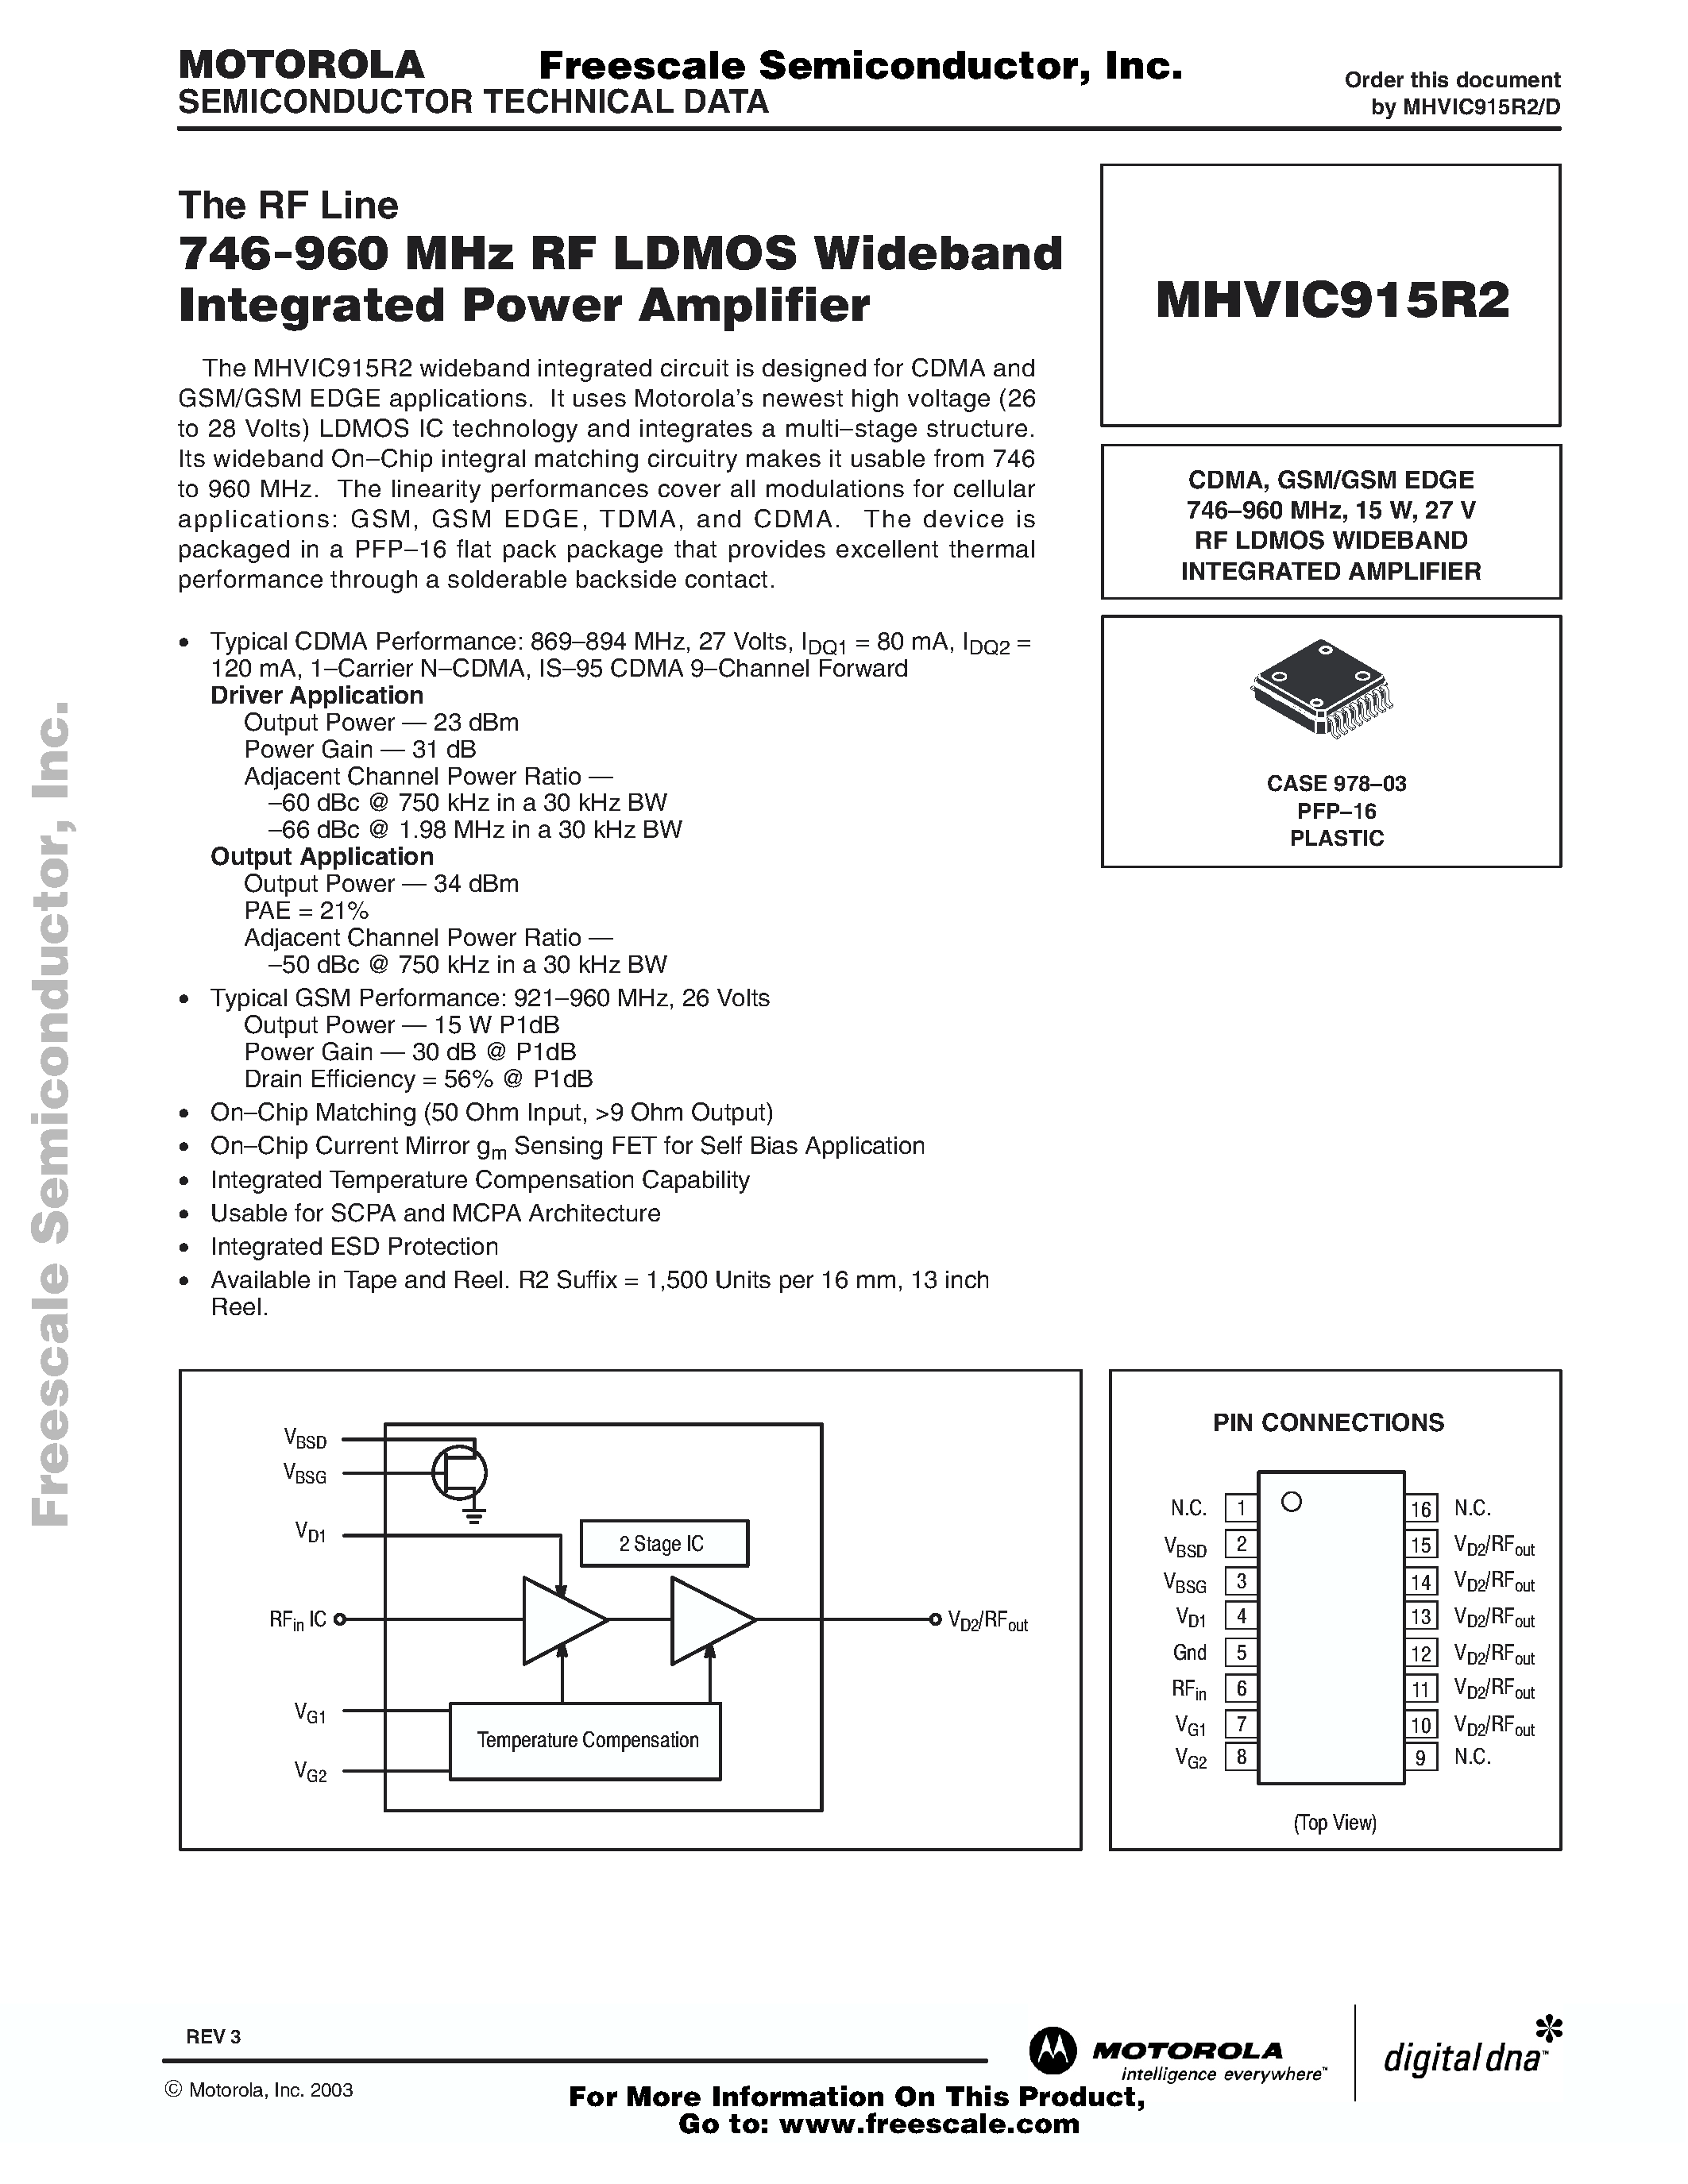 Datasheet MHVIC915R2 - 746-960 MHz RF LDMOS Wideband Integrated Power Amplifier page 1